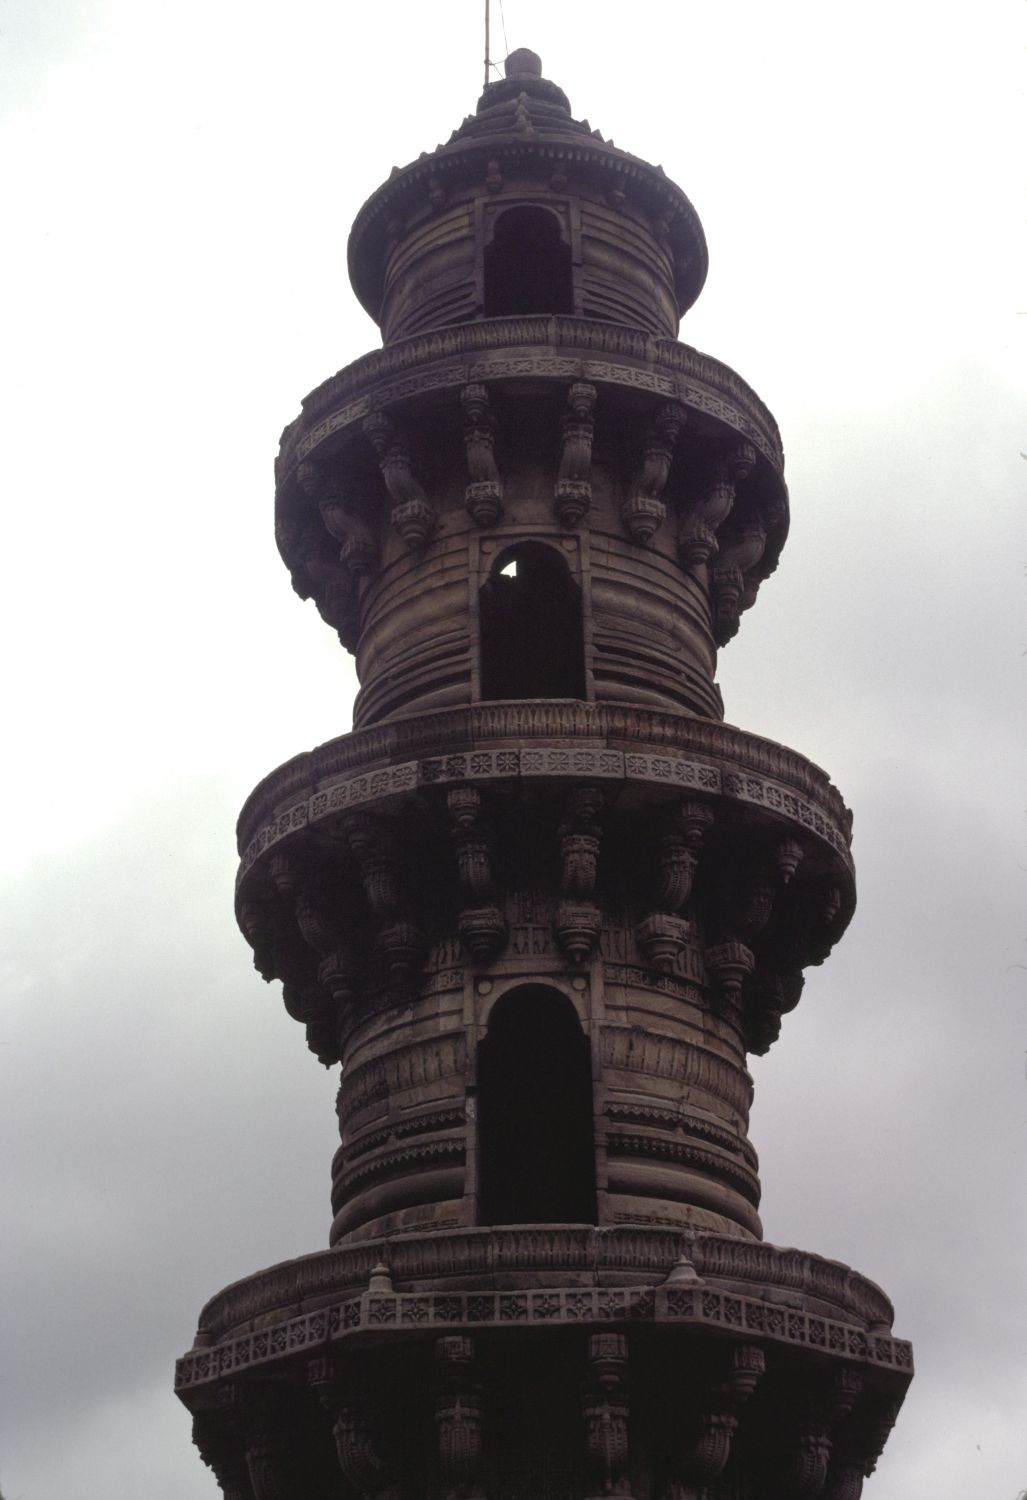 View of top part of north minaret, showing successive balconies formed by cornices.